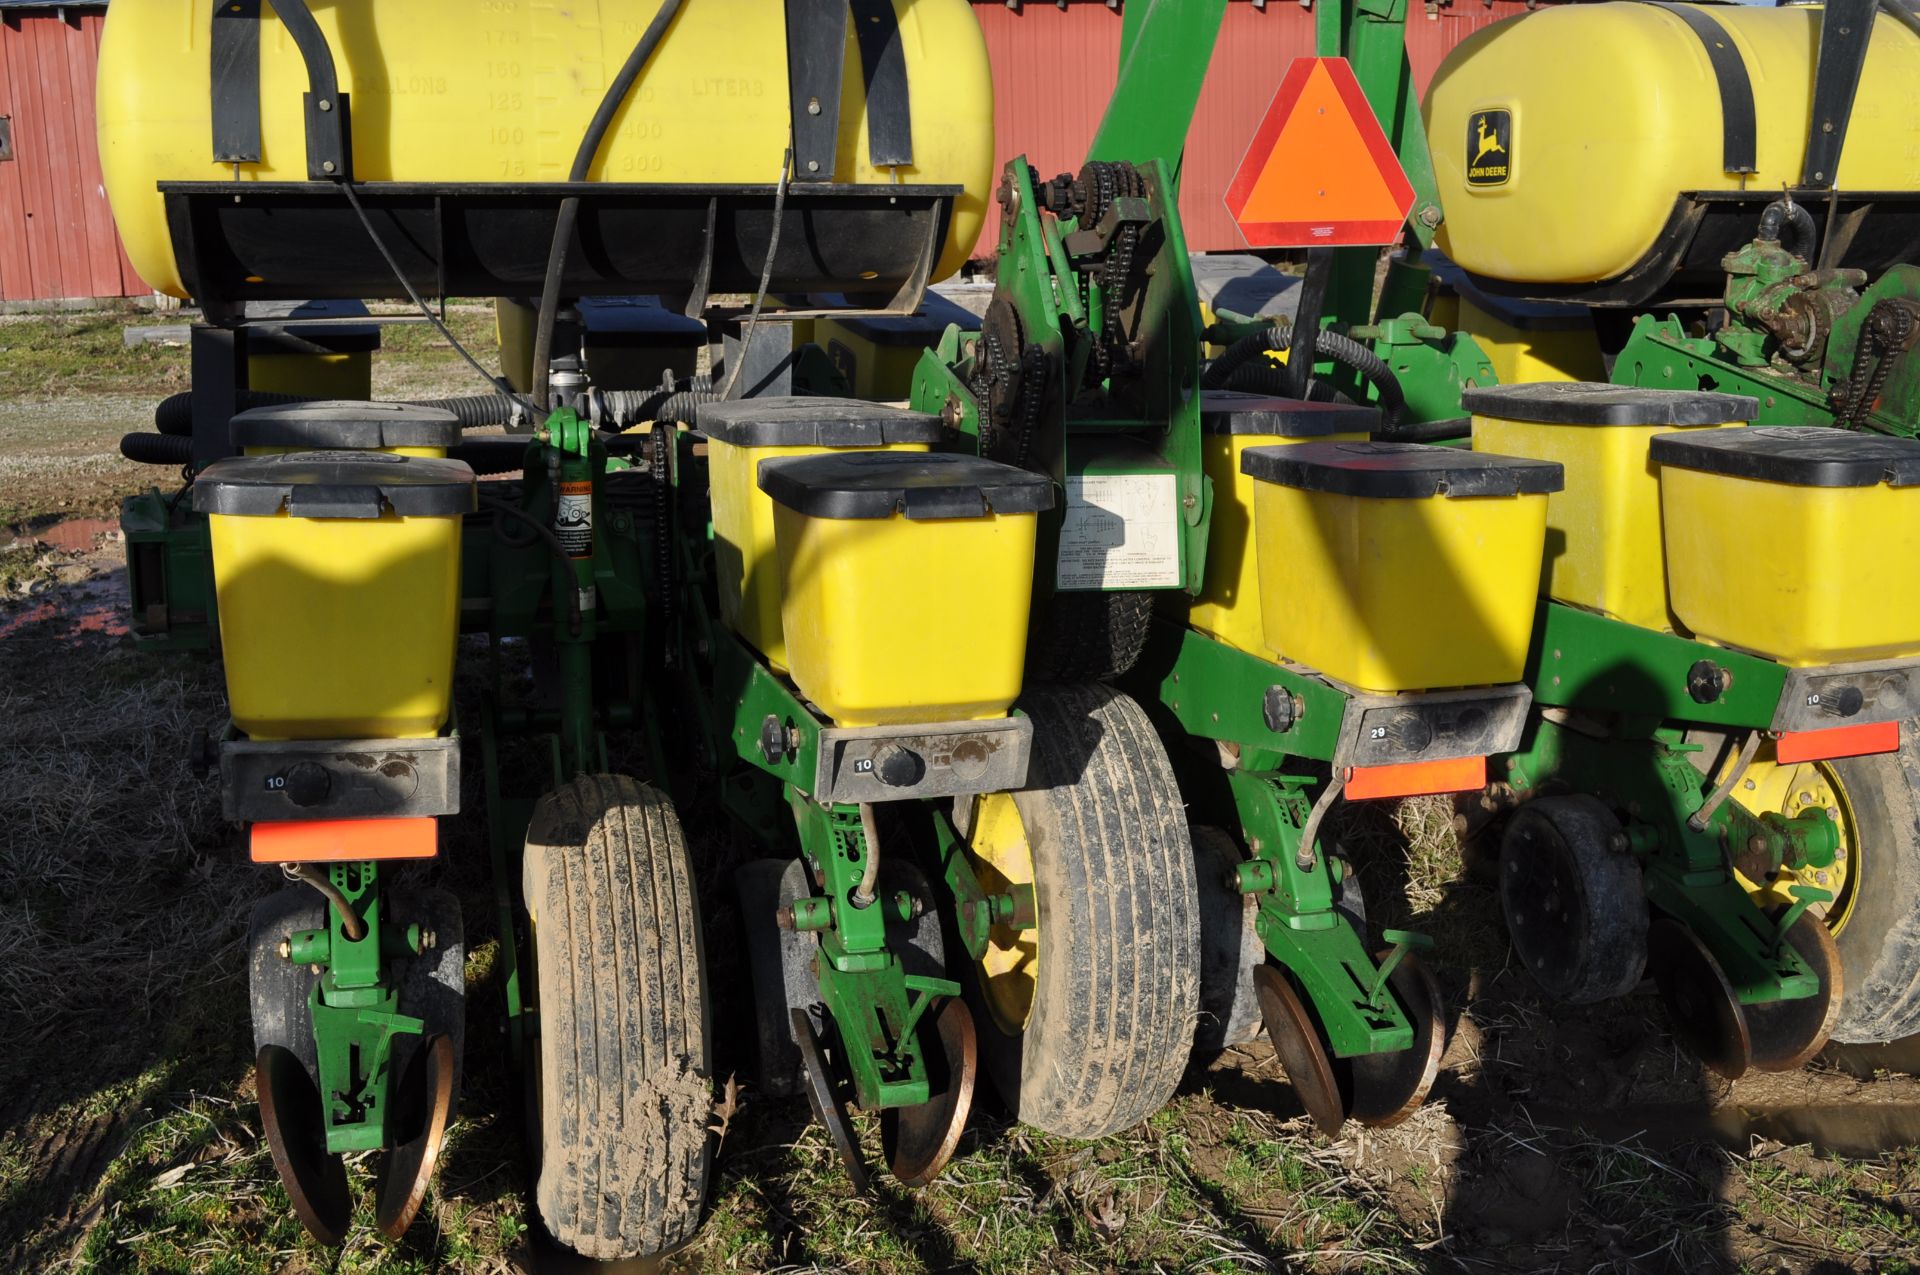 John Deere 1760 conservation planter, 12 row x 30”, hyd front fold, on row seed boxes, spring DP - Image 6 of 17